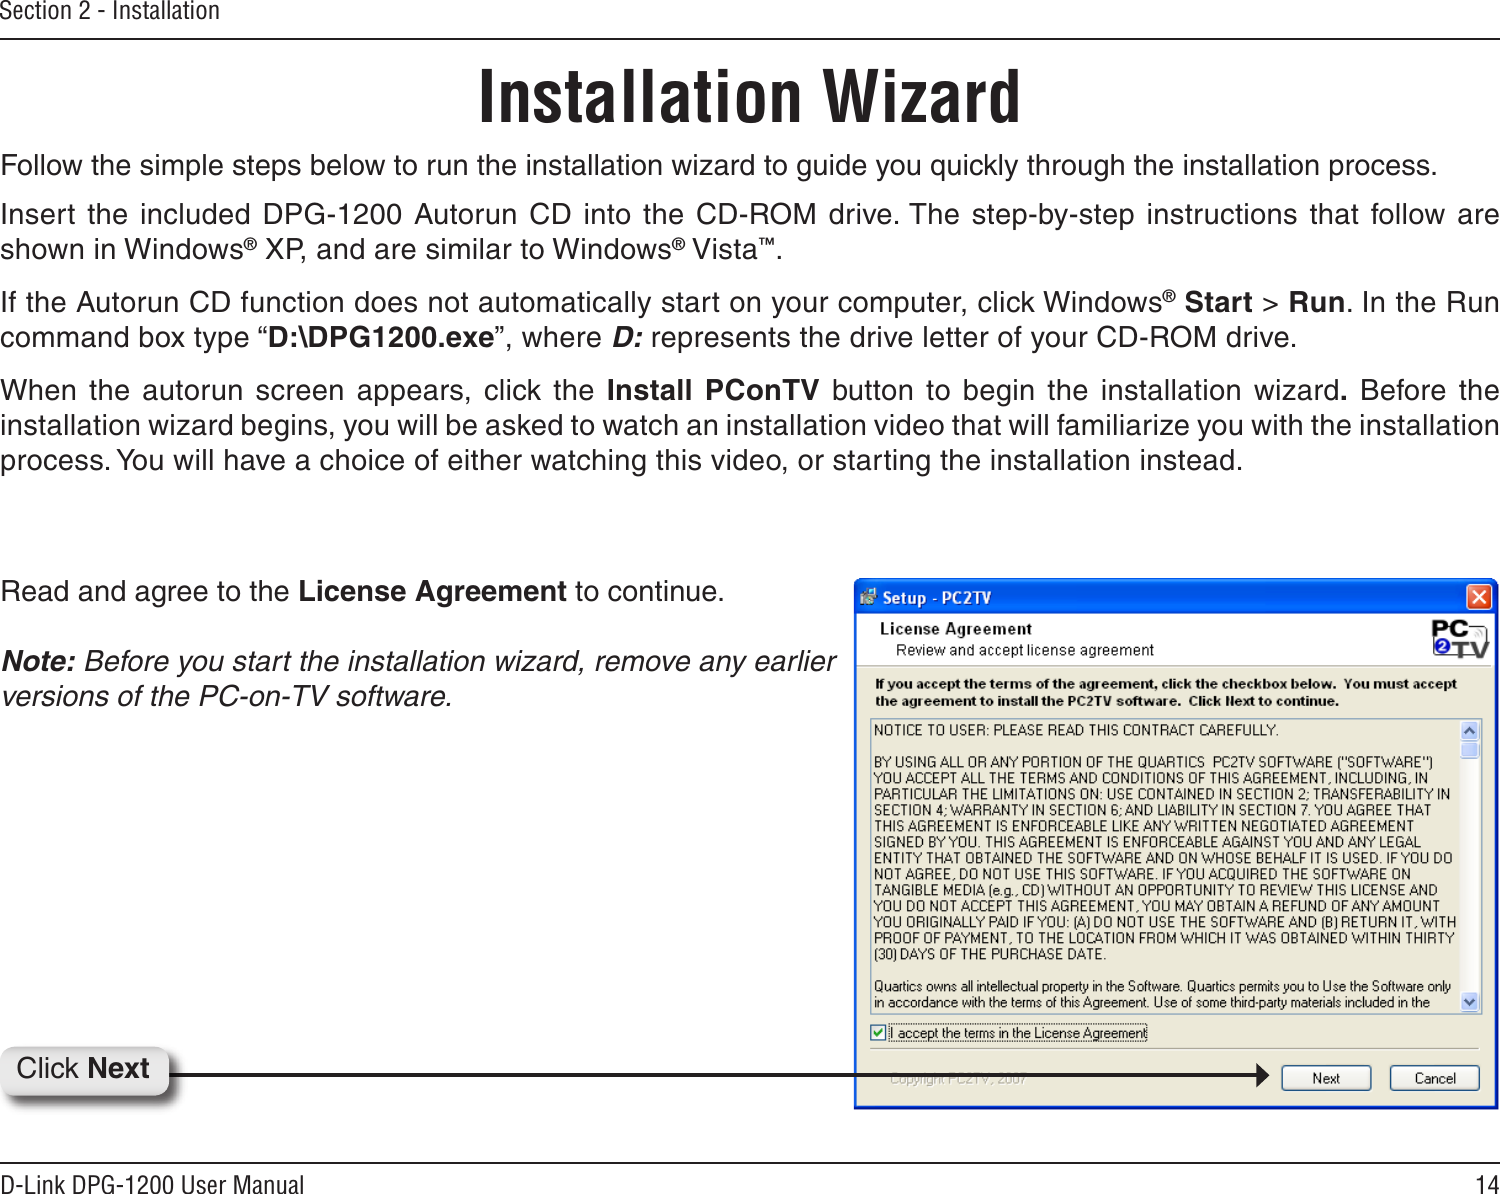 14D-Link DPG-1200 User ManualSection 2 - InstallationFollow the simple steps below to run the installation wizard to guide you quickly through the installation process. Insert the  included DPG-1200 Autorun CD into the CD-ROM drive. The  step-by-step instructions  that follow are shown in Windows® XP, and are similar to Windows® Vista™.If the Autorun CD function does not automatically start on your computer, click Windows® Start &gt; Run. In the Run command box type “D:\DPG1200.exe”, where D: represents the drive letter of your CD-ROM drive.When the  autorun screen  appears, click  the  Install  PConTV  button to begin  the  installation  wizard.  Before the installation wizard begins, you will be asked to watch an installation video that will familiarize you with the installation process. You will have a choice of either watching this video, or starting the installation instead. Installation WizardRead and agree to the License Agreement to continue. Note: Before you start the installation wizard, remove any earlier versions of the PC-on-TV software.Click Next